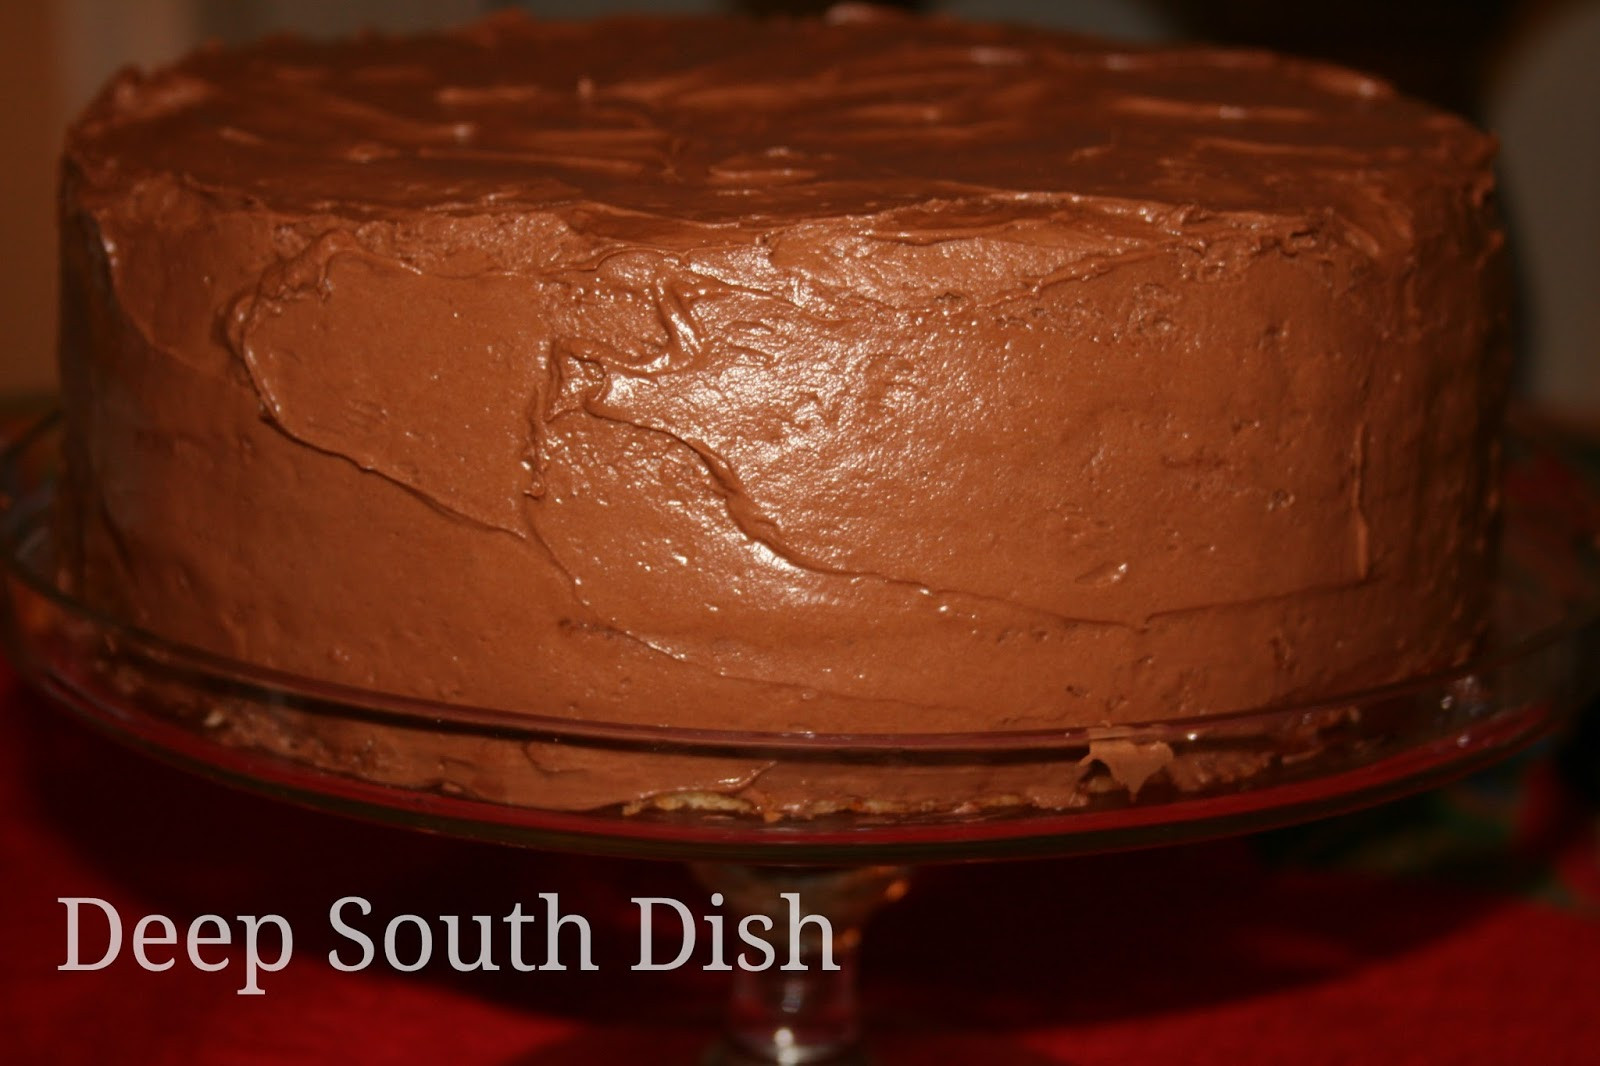 Paula Deen Yellow Cake With Chocolate Frosting
 Deep South Dish Basic 1 2 3 4 Yellow Birthday Cake with